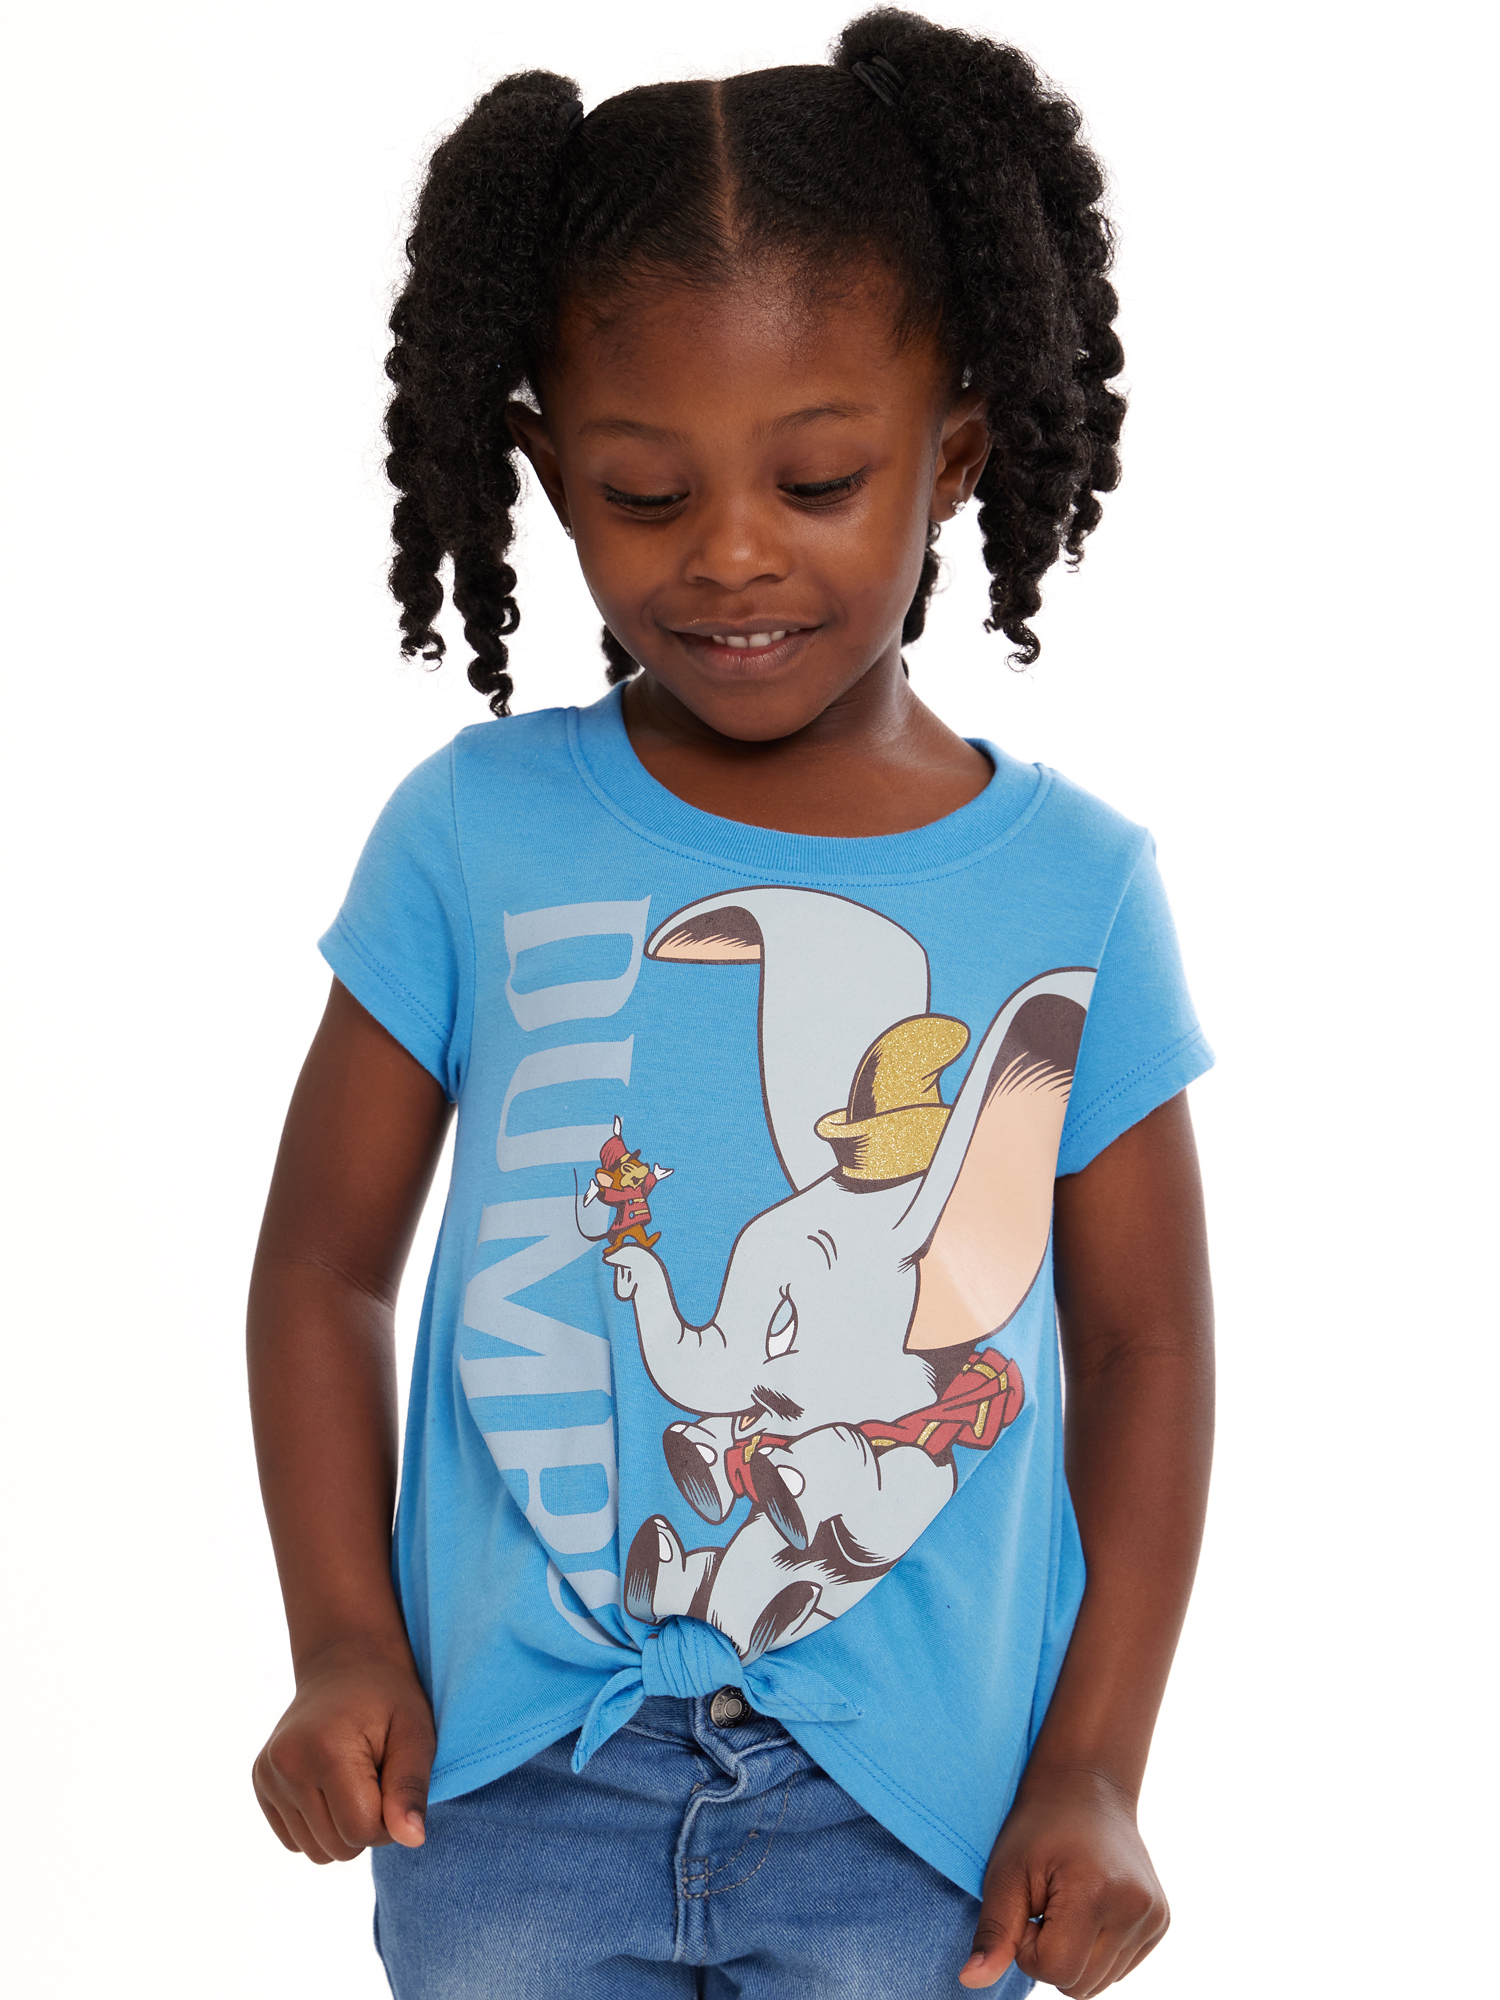 Disney Classics Toddler Girl Graphic Print Fashion T-Shirts, 4-Pack, Sizes 2T-5T - image 2 of 13